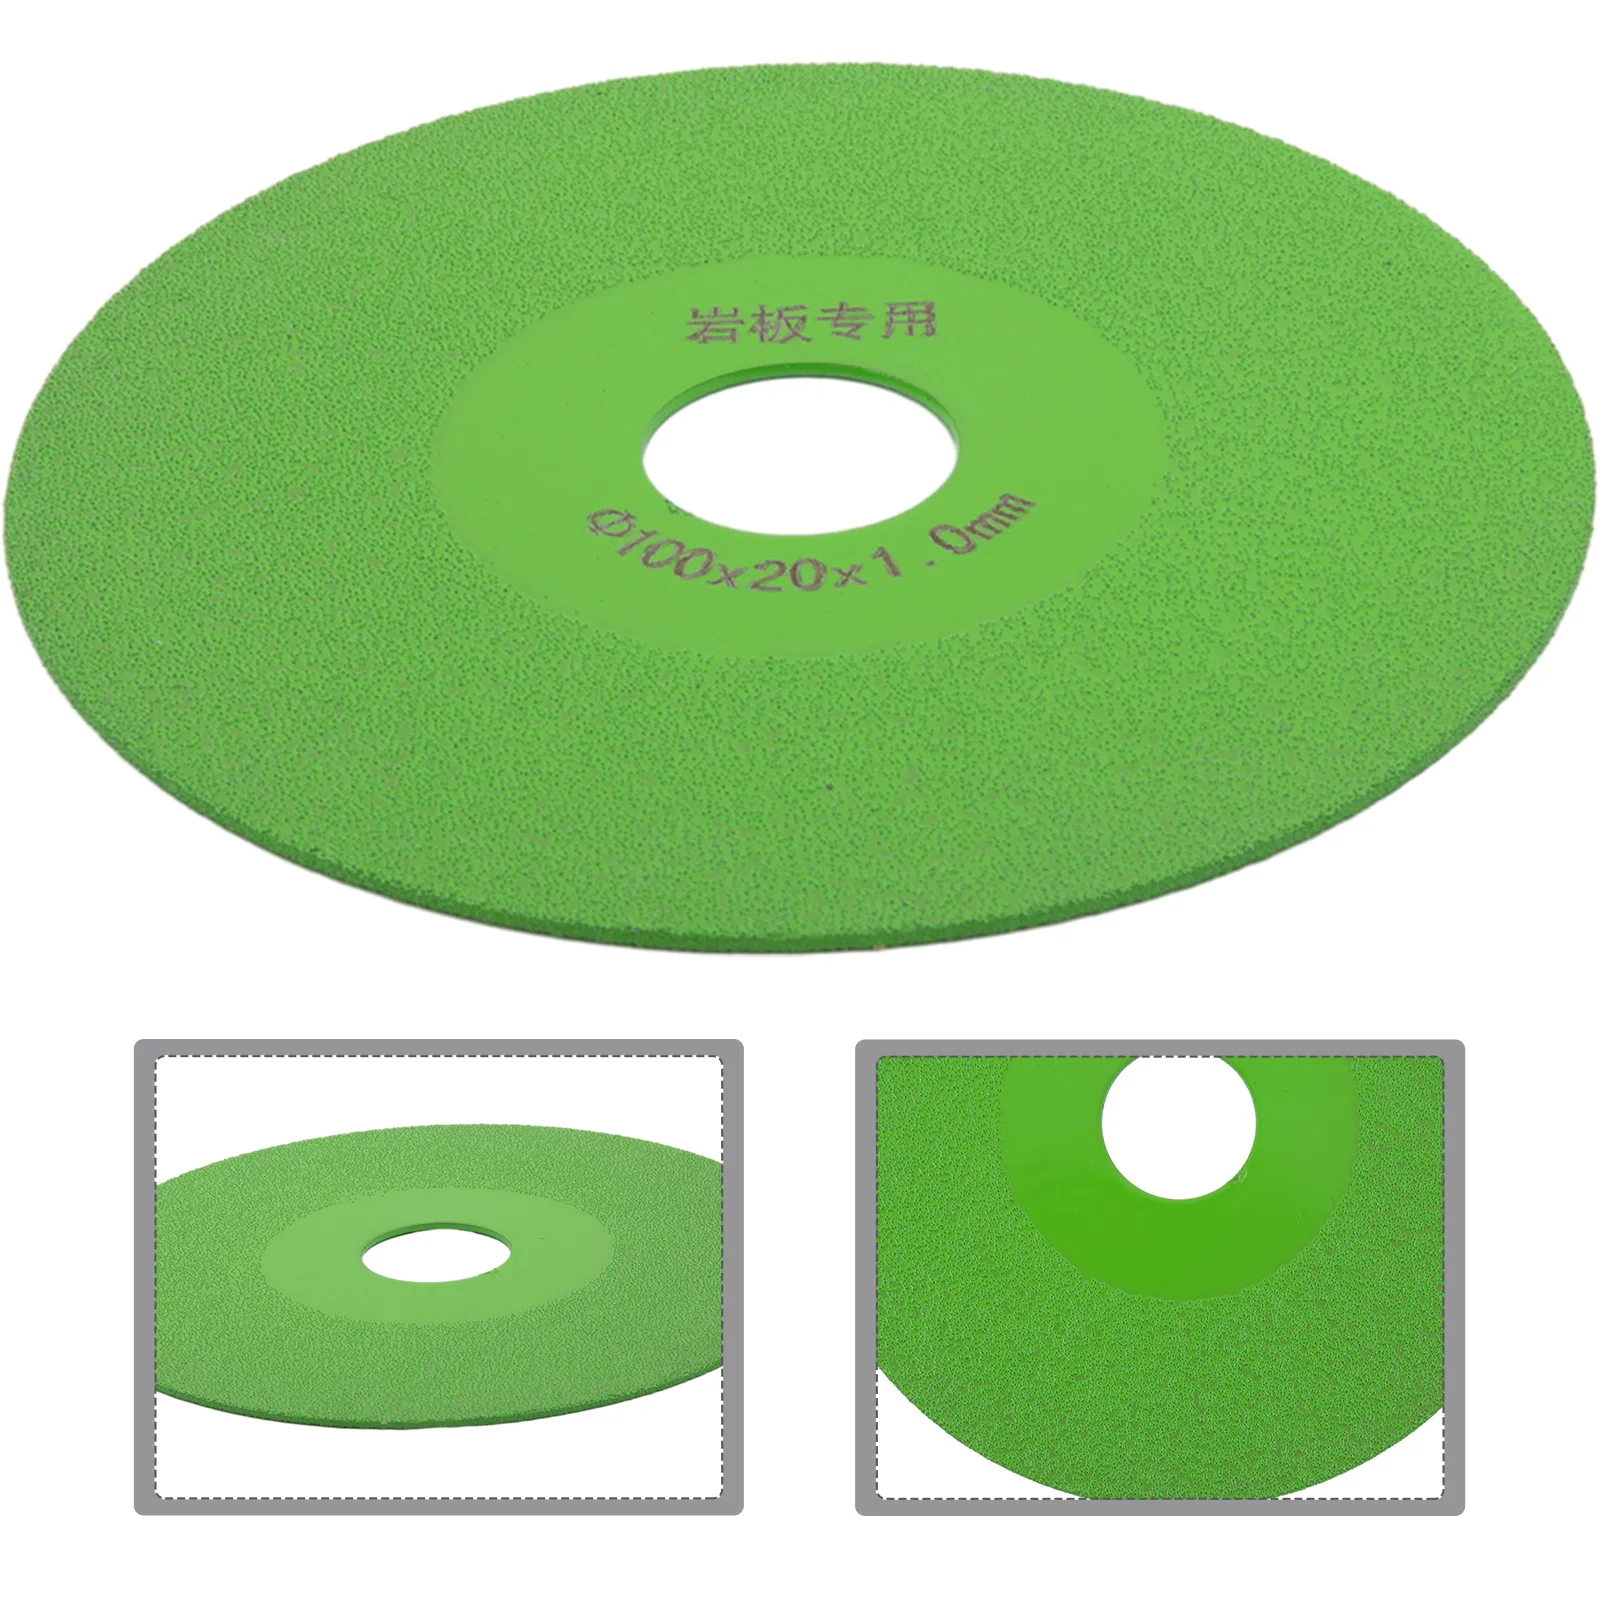 

Slate Smooth Cutting Ceramic Chamfering And Grinding Of Tile Cutting Discs Grinding 100×20×1mm Cutting Discs Diamond Blades None